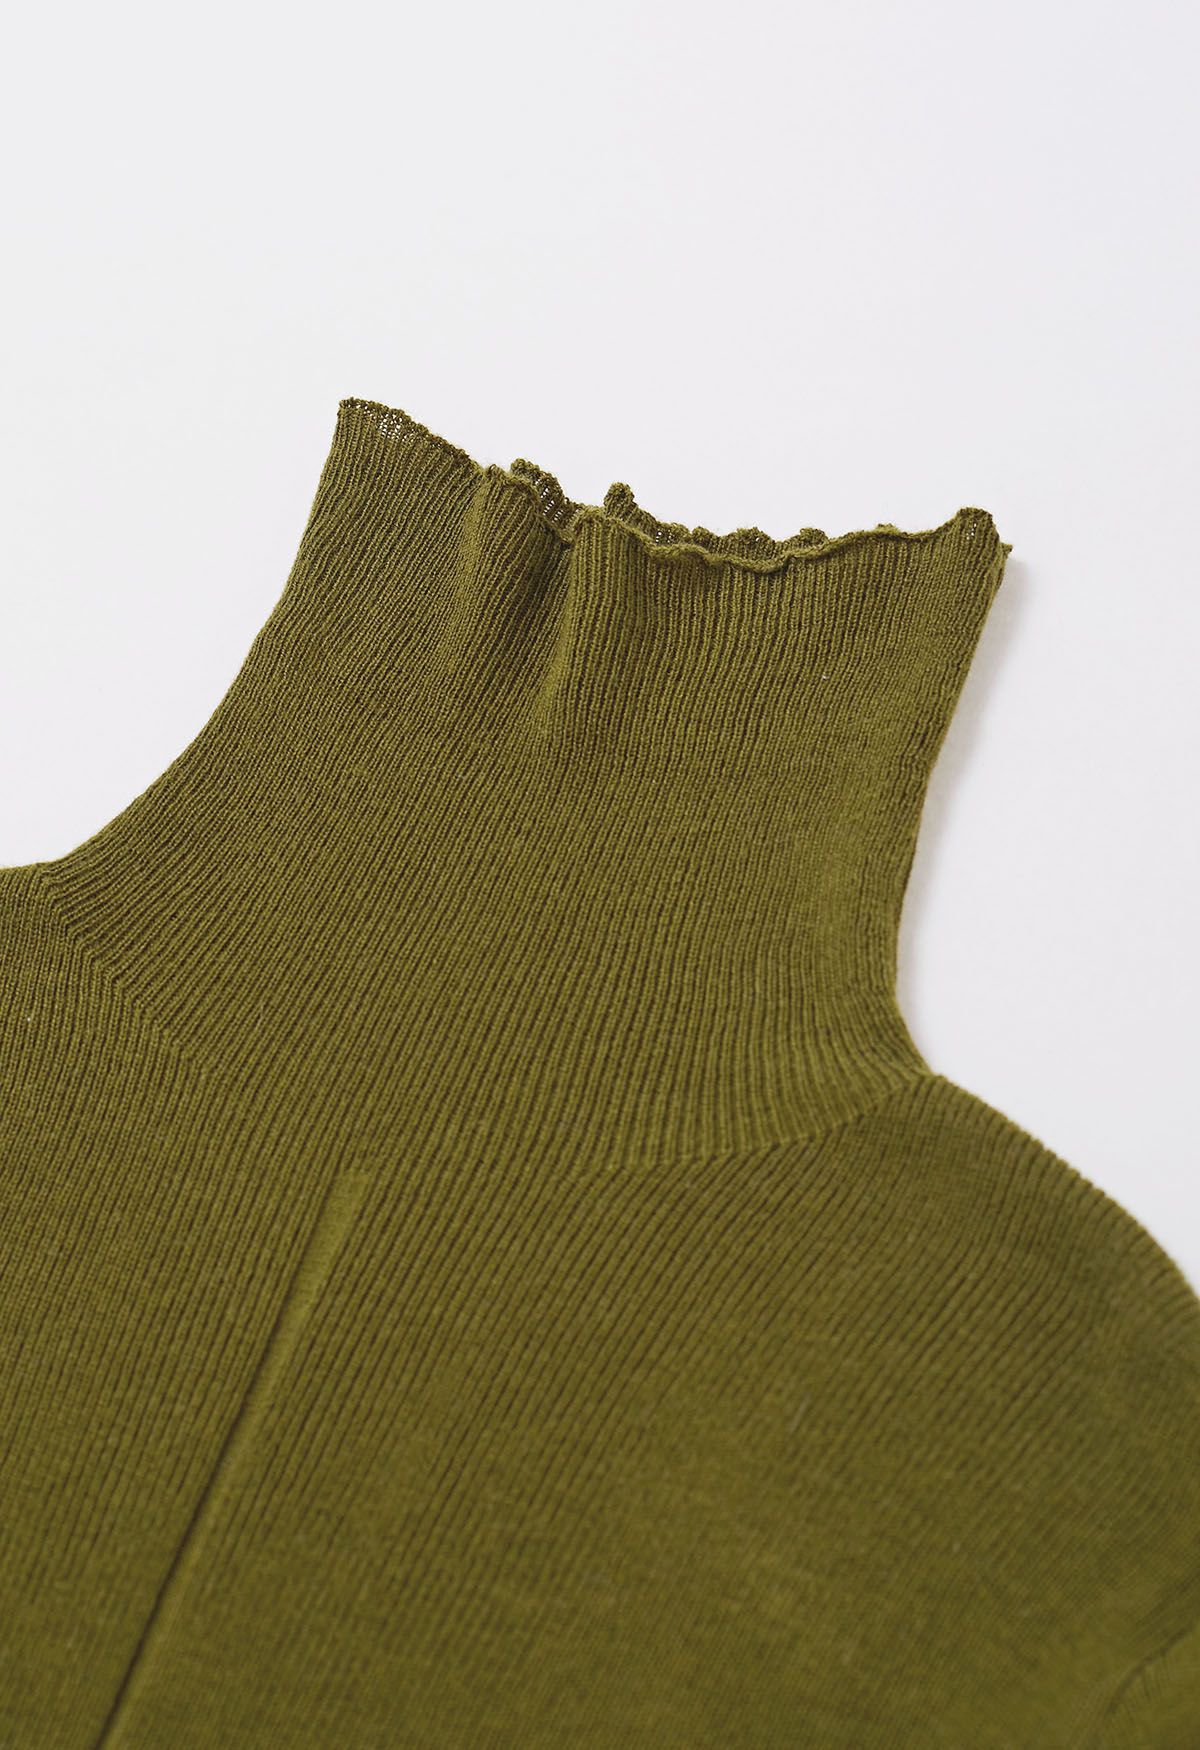 Basic High Neck Soft Knit Top in Olive